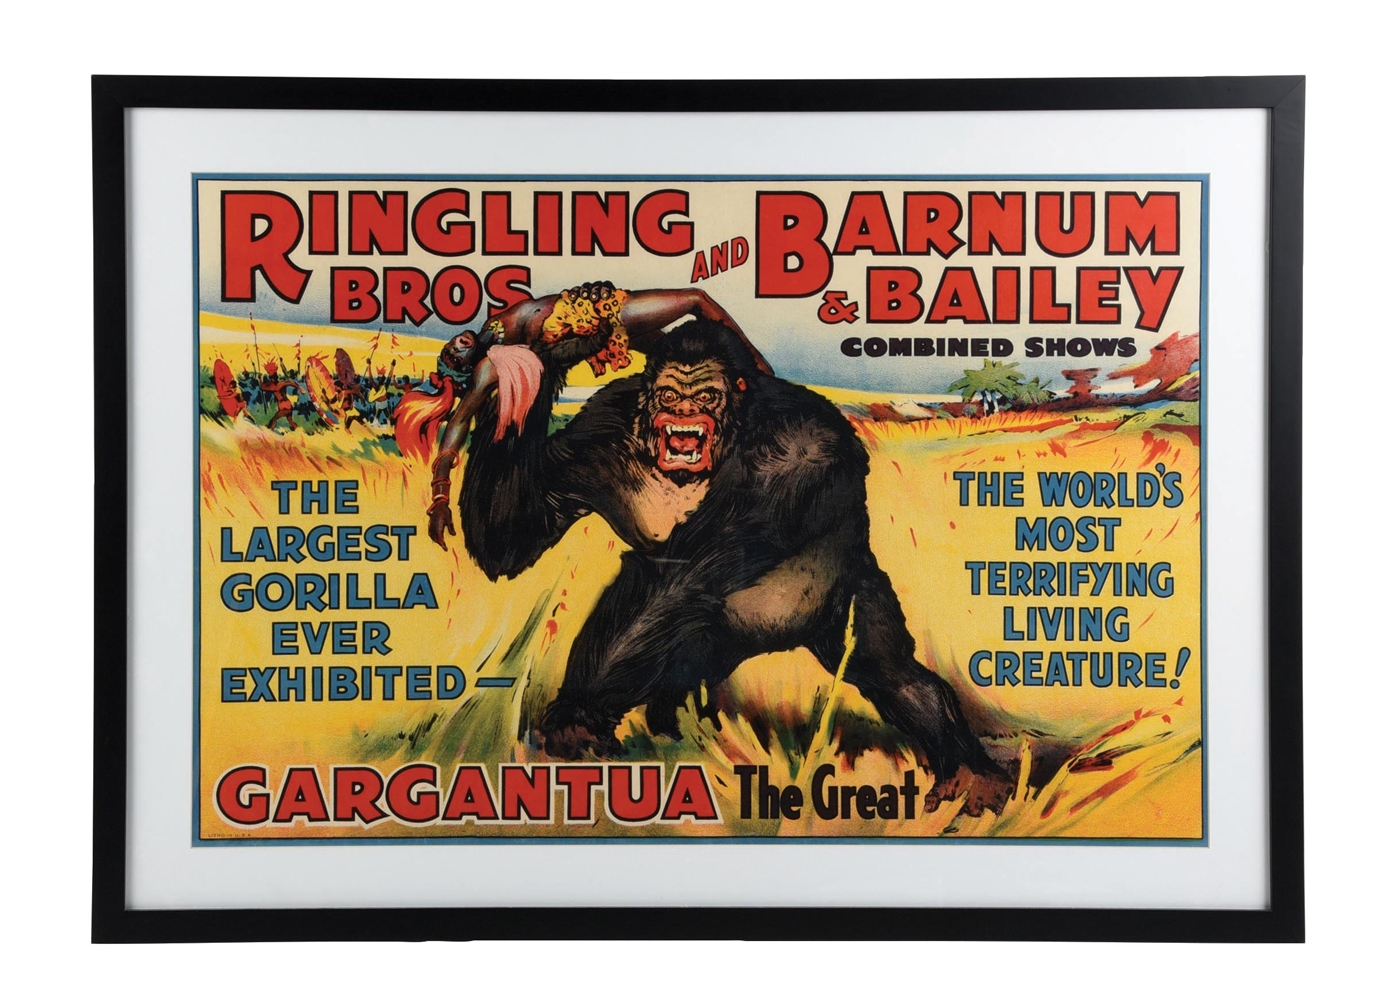 RINGLING BROS AND BARNUM & BAILEY COMBINED SHOWS PAPER LITHOGRAPH POSTER W/ GARGANTUA THE GREAT GRAPHIC